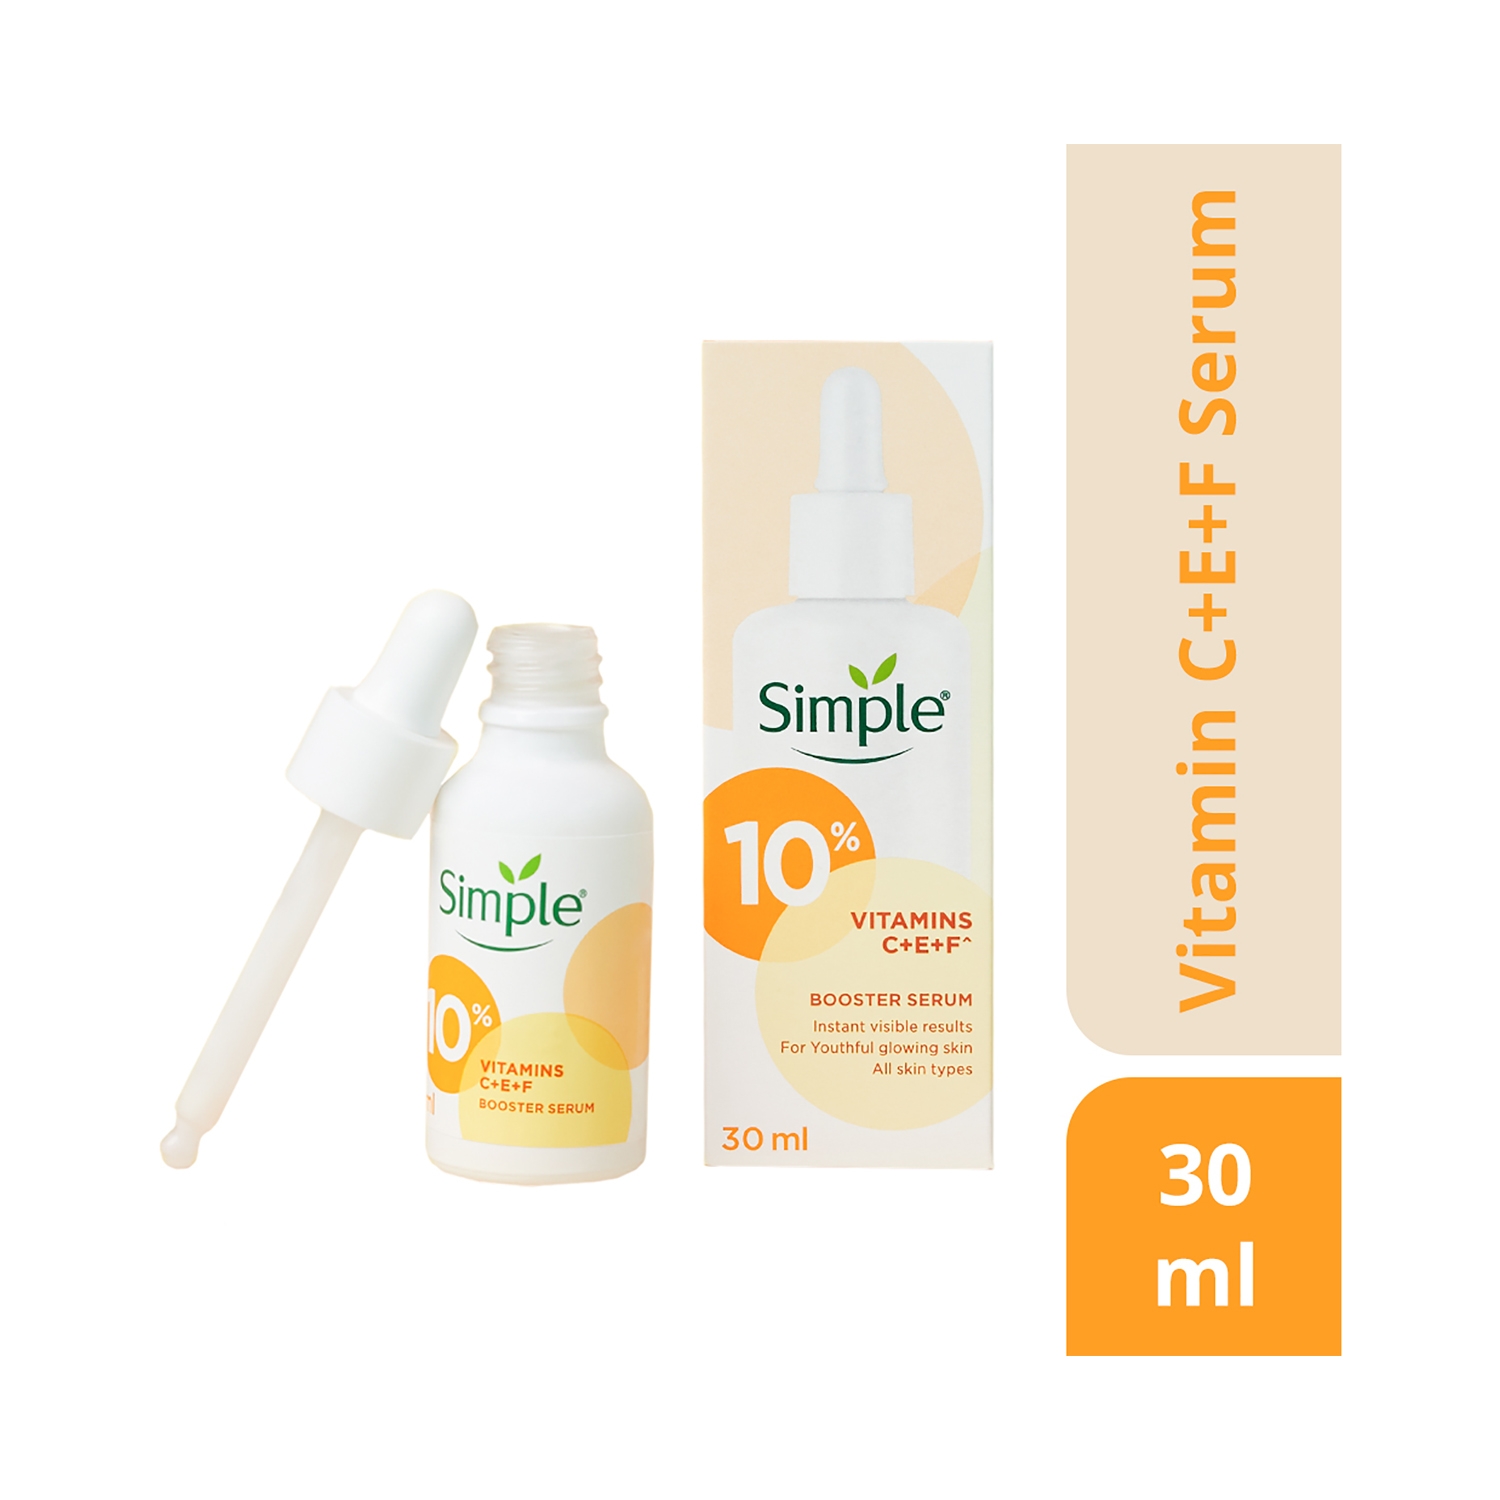 Simple | Simple Booster Serum 10% Vitamin C+E+F For Youthful Glowing Skin (30ml)